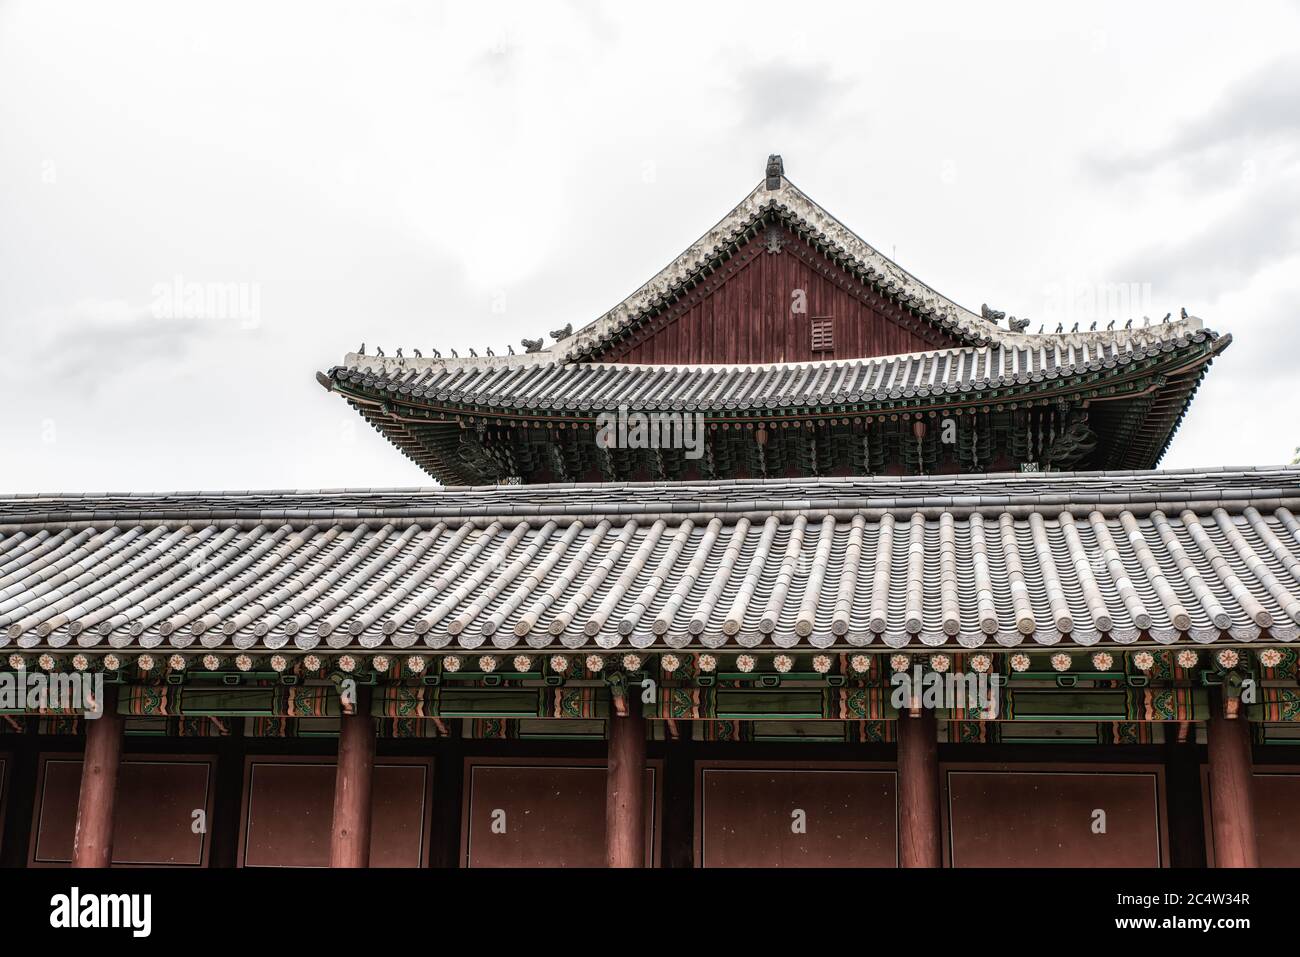 The Changdeokgung palace in Seoul, South Korea. Stock Photo